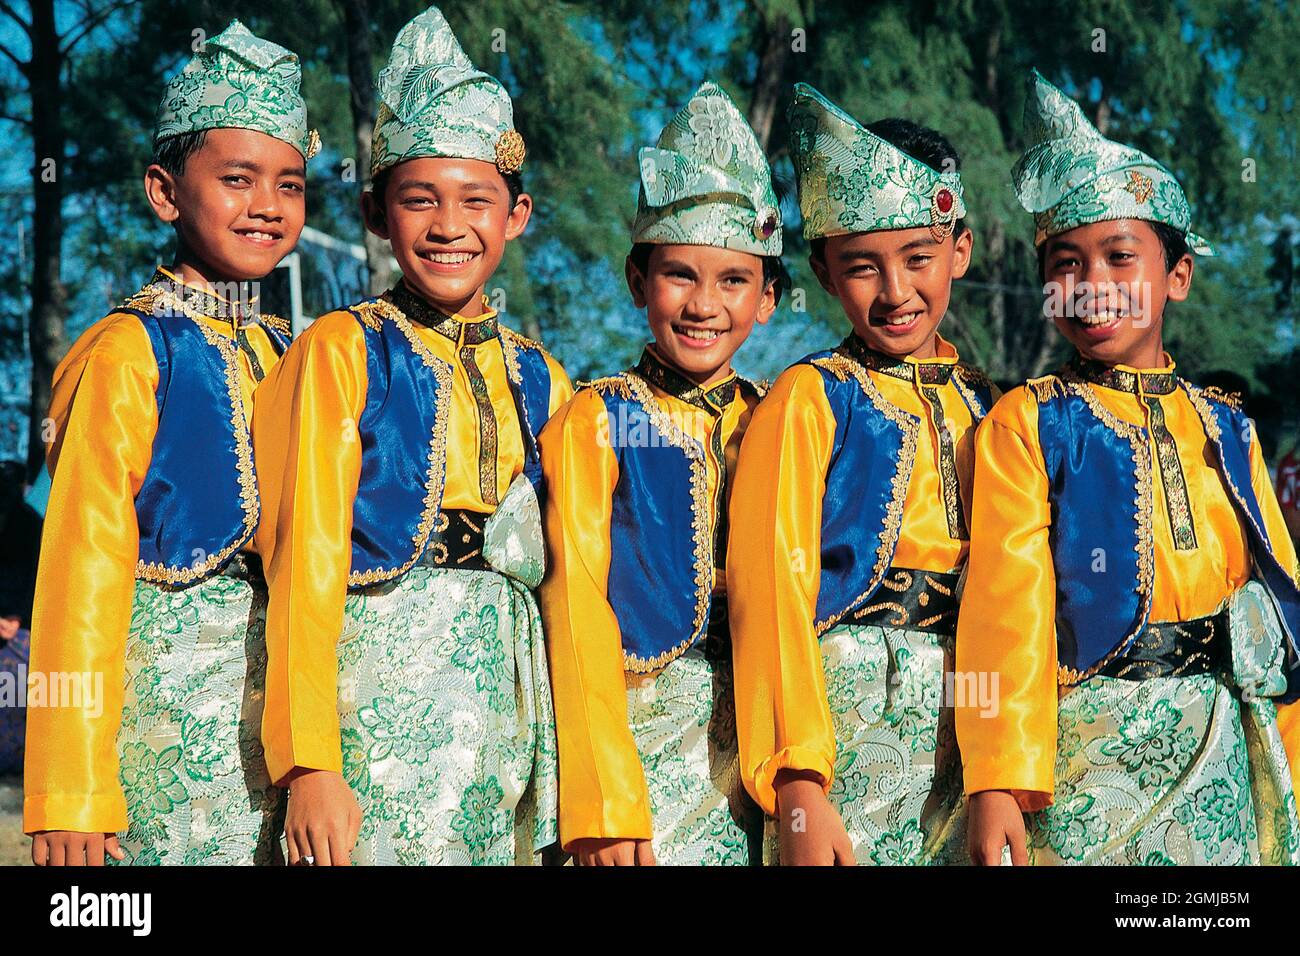 Singapore. Malay boy dancers in traditional costume. Stock Photo